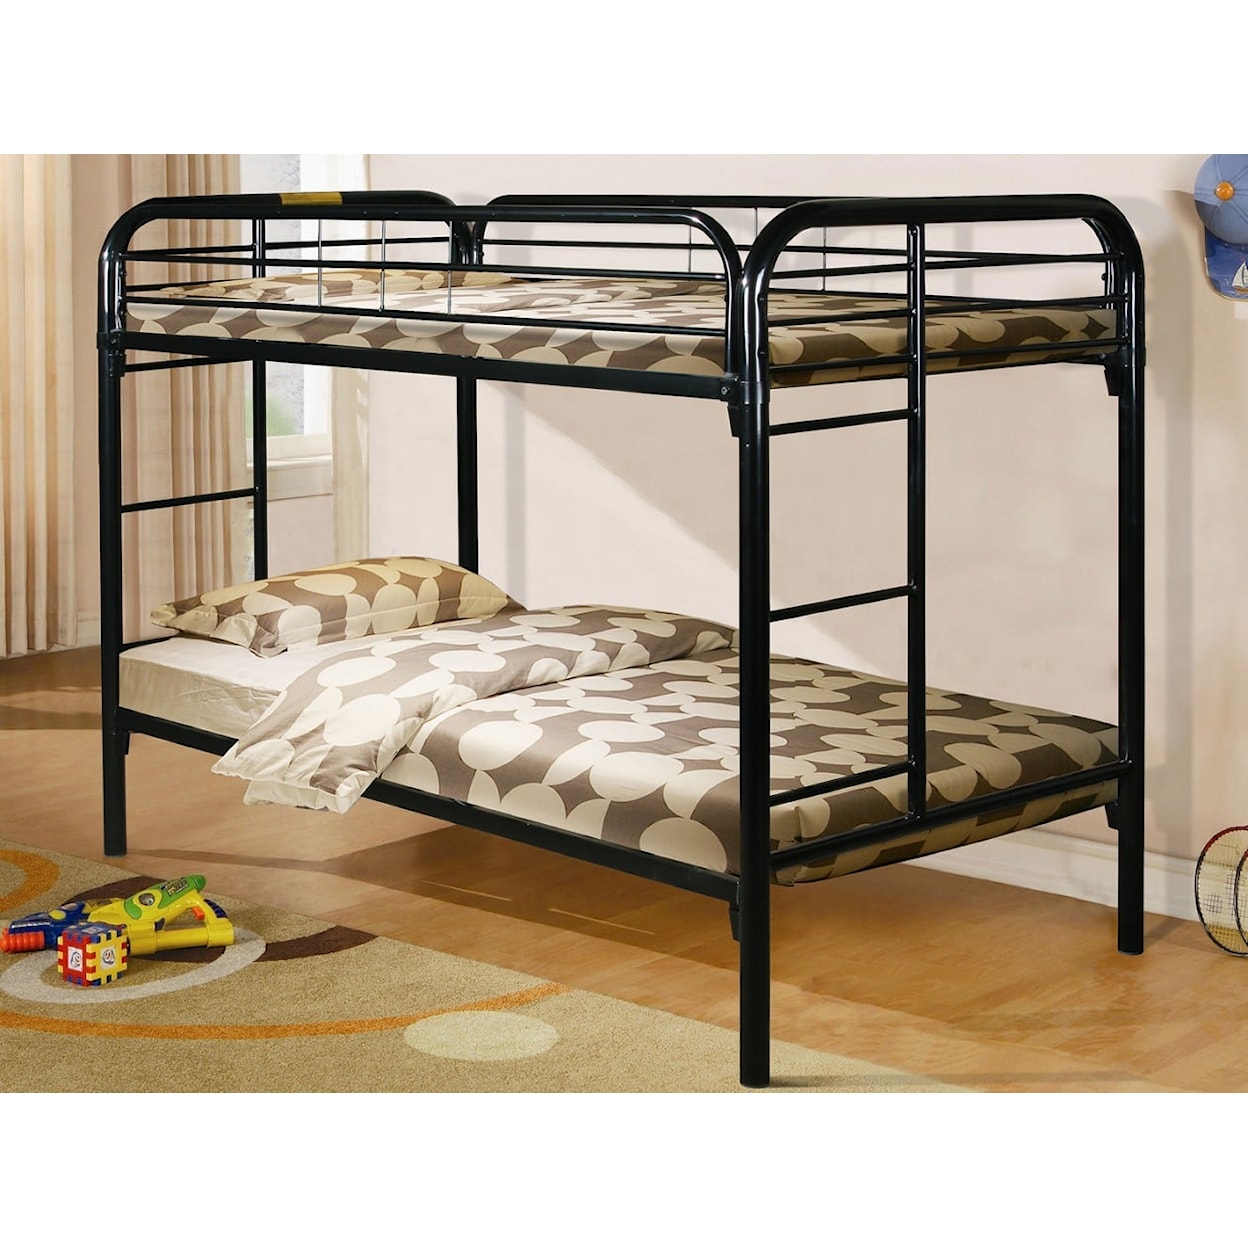 Donco Trading Co Bunkbeds TWIN/TWIN BLACK METAL BUNK BED |